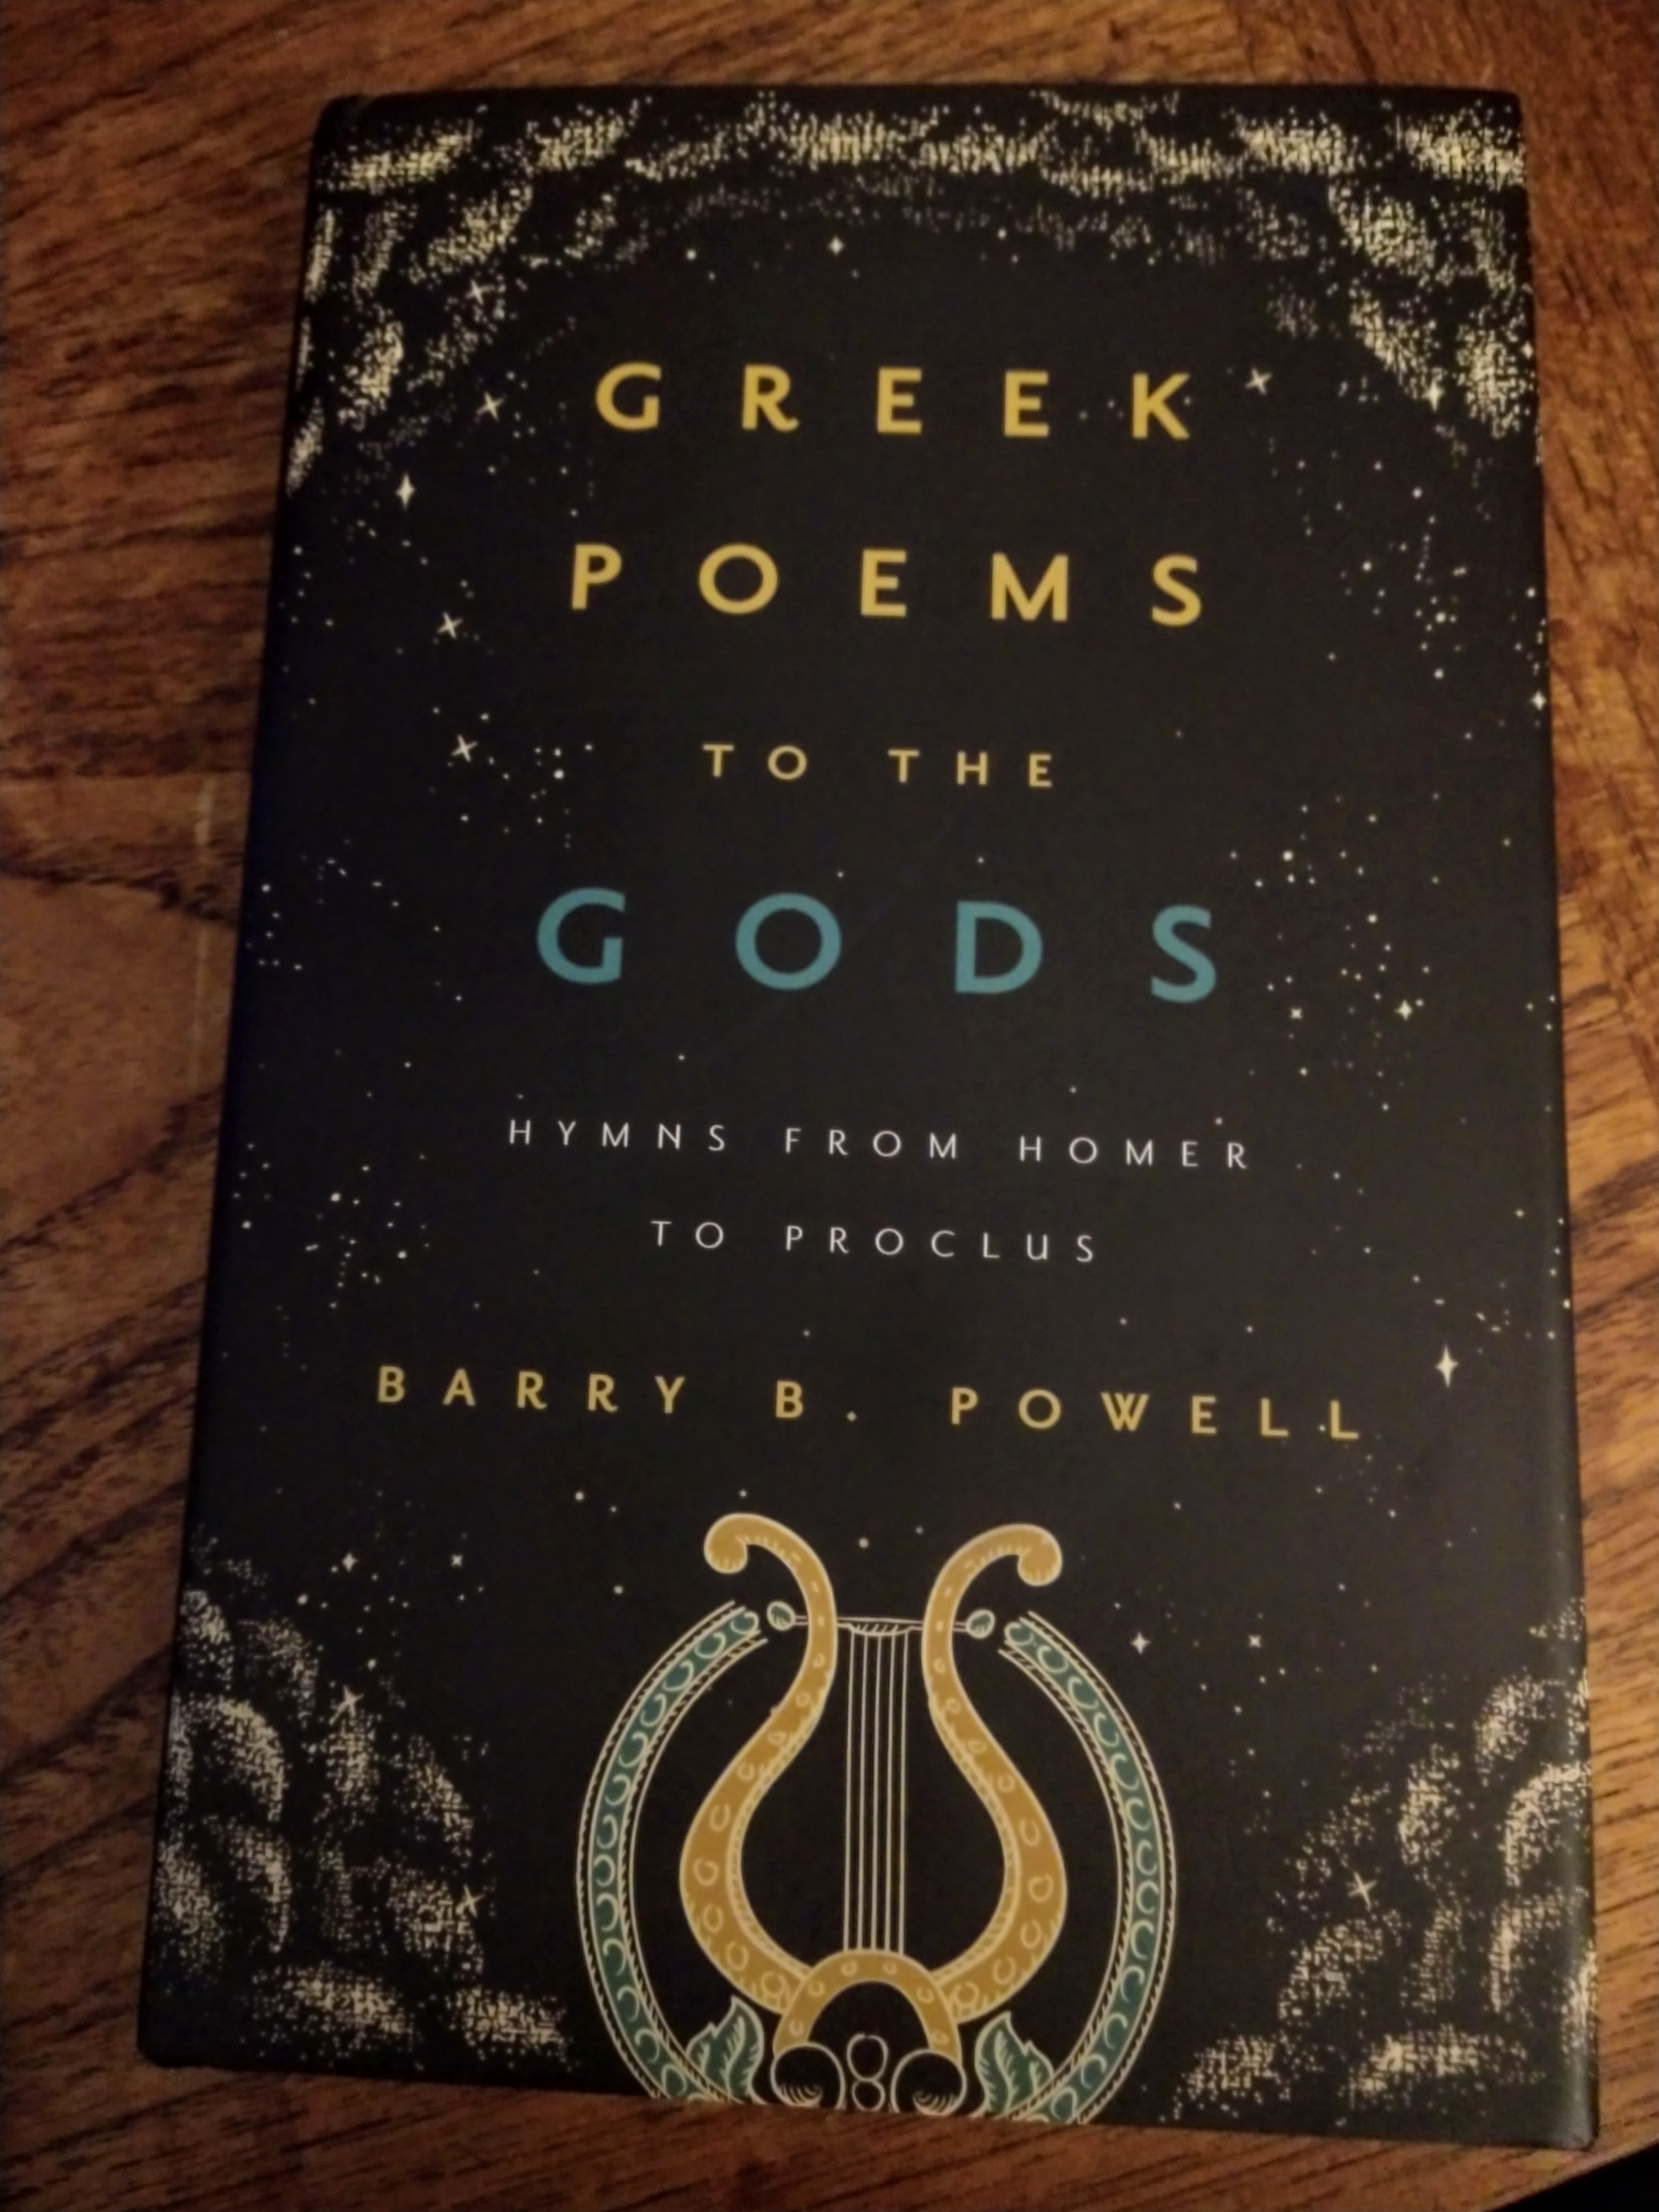 Greek Poems to the Gods by Barry Powell